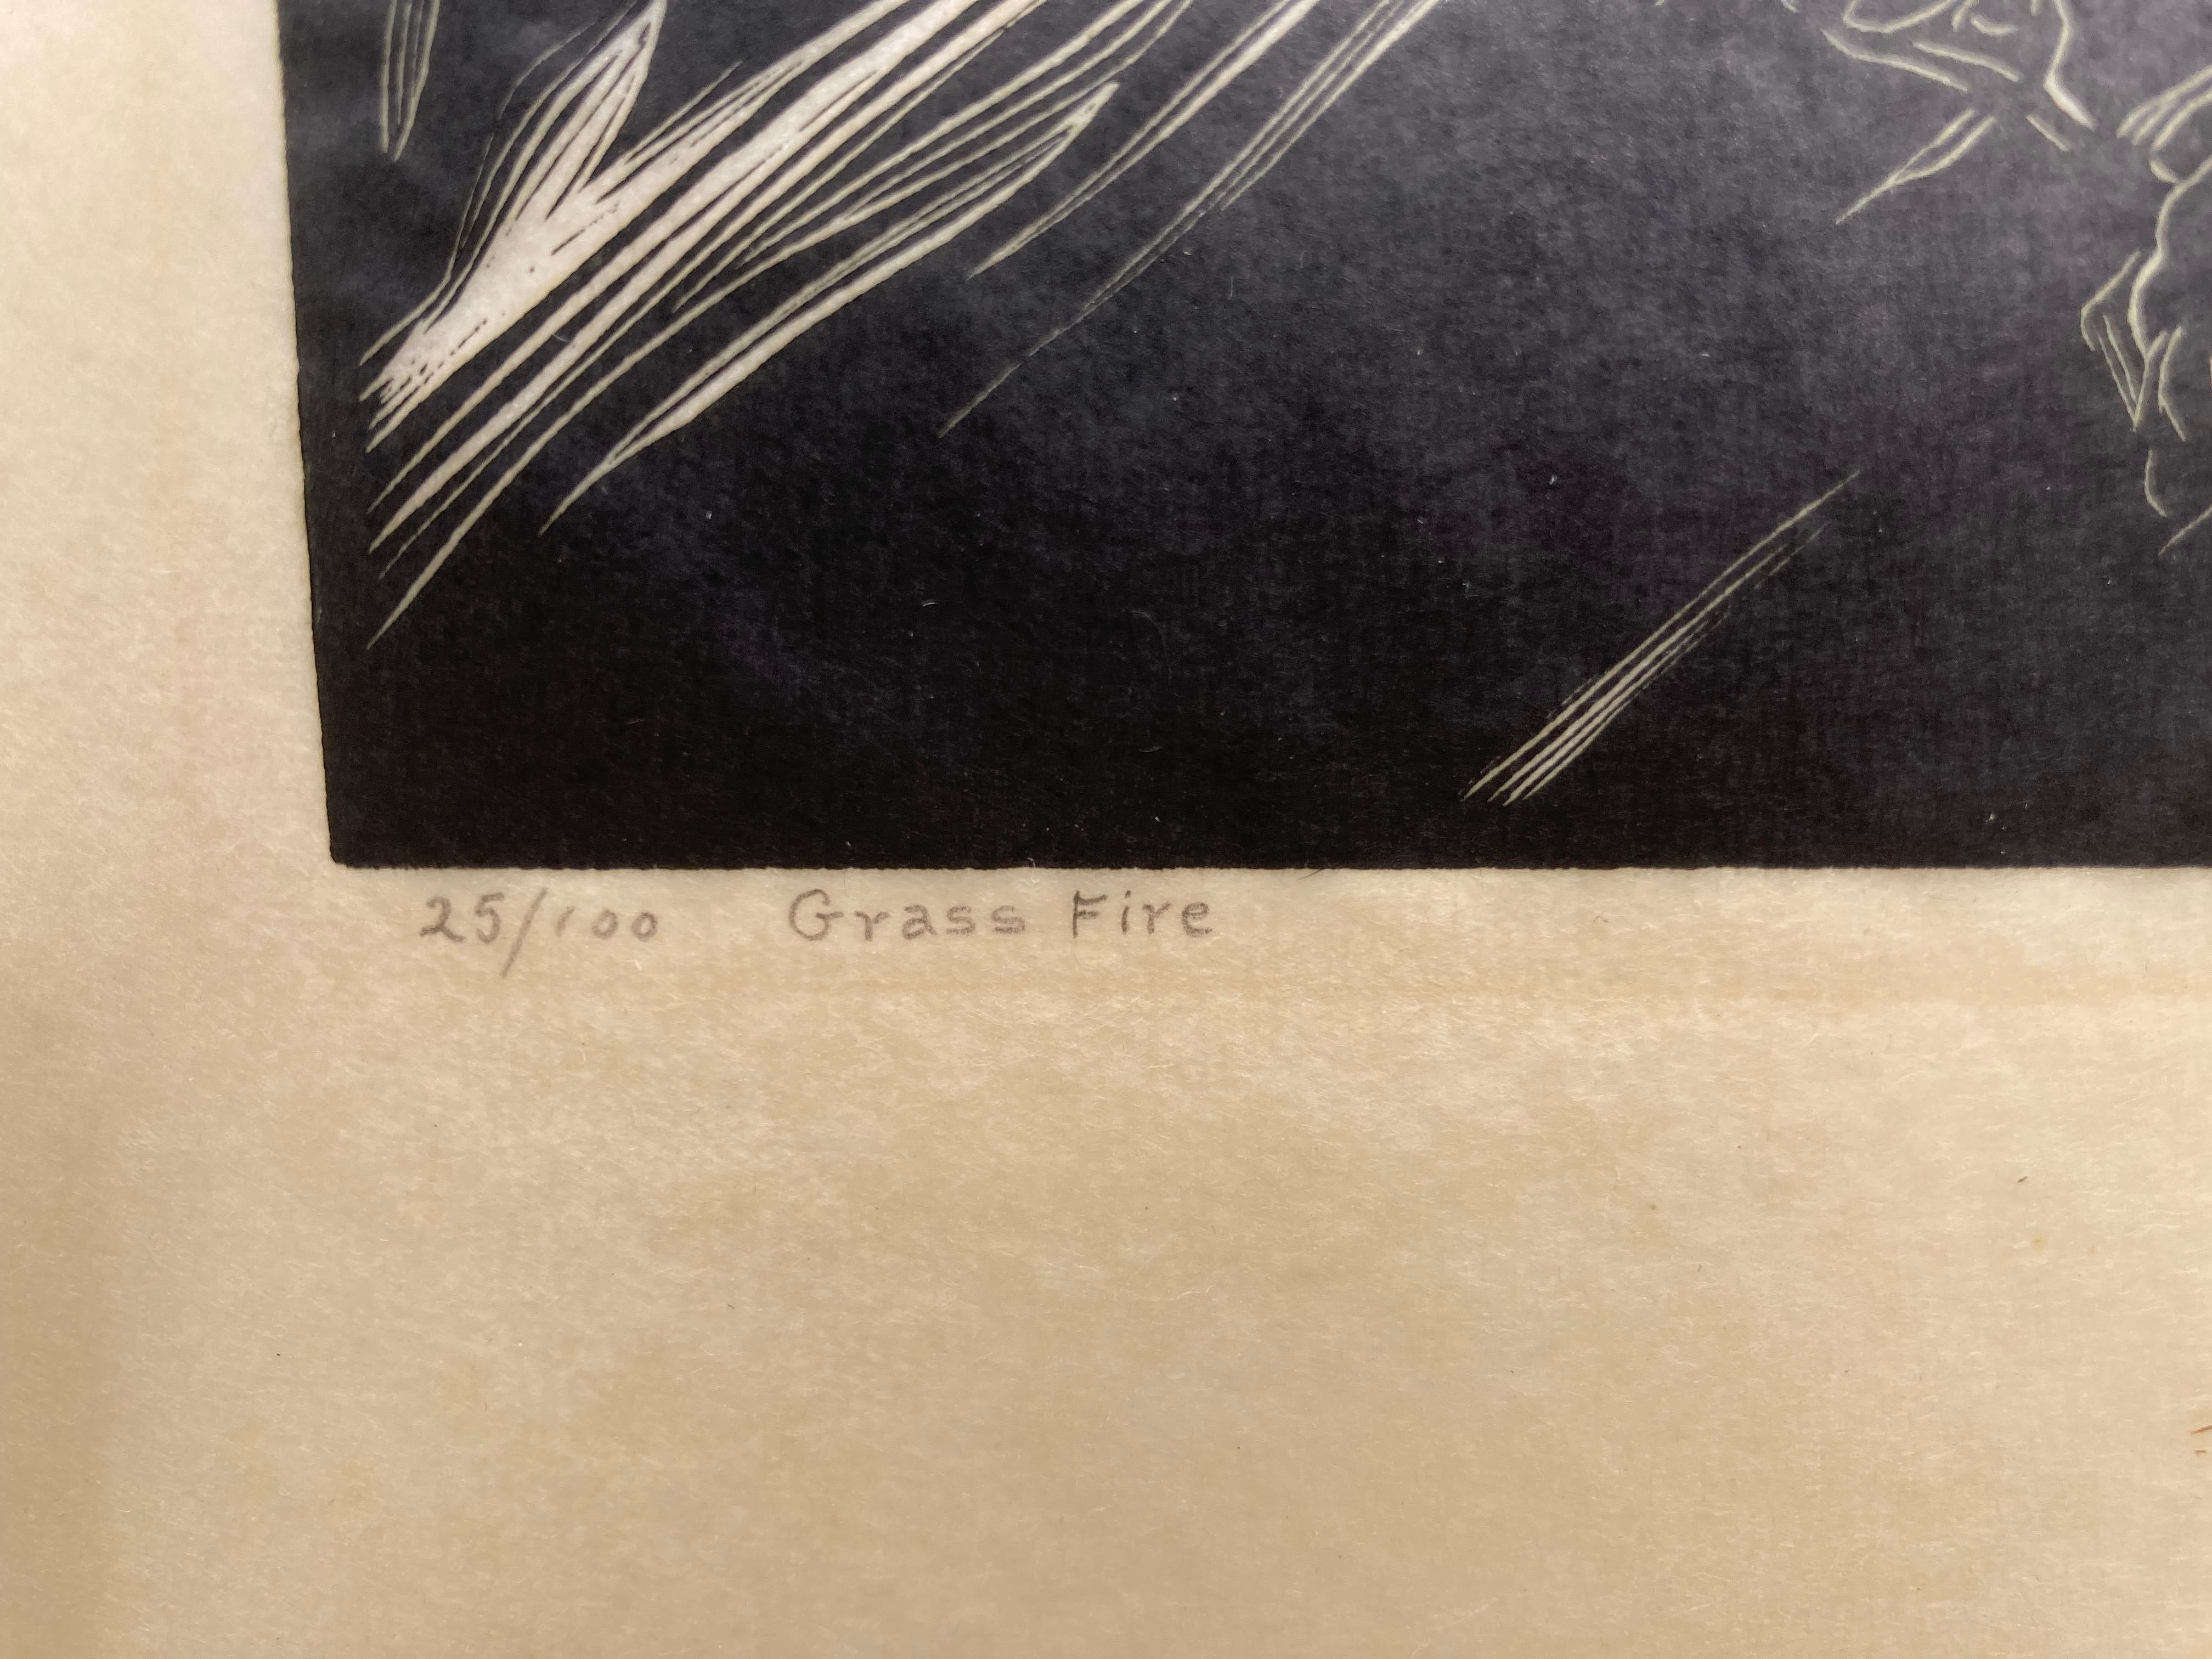 GRASS FIRE. - Very Scarce Early signed Impression For Sale 2